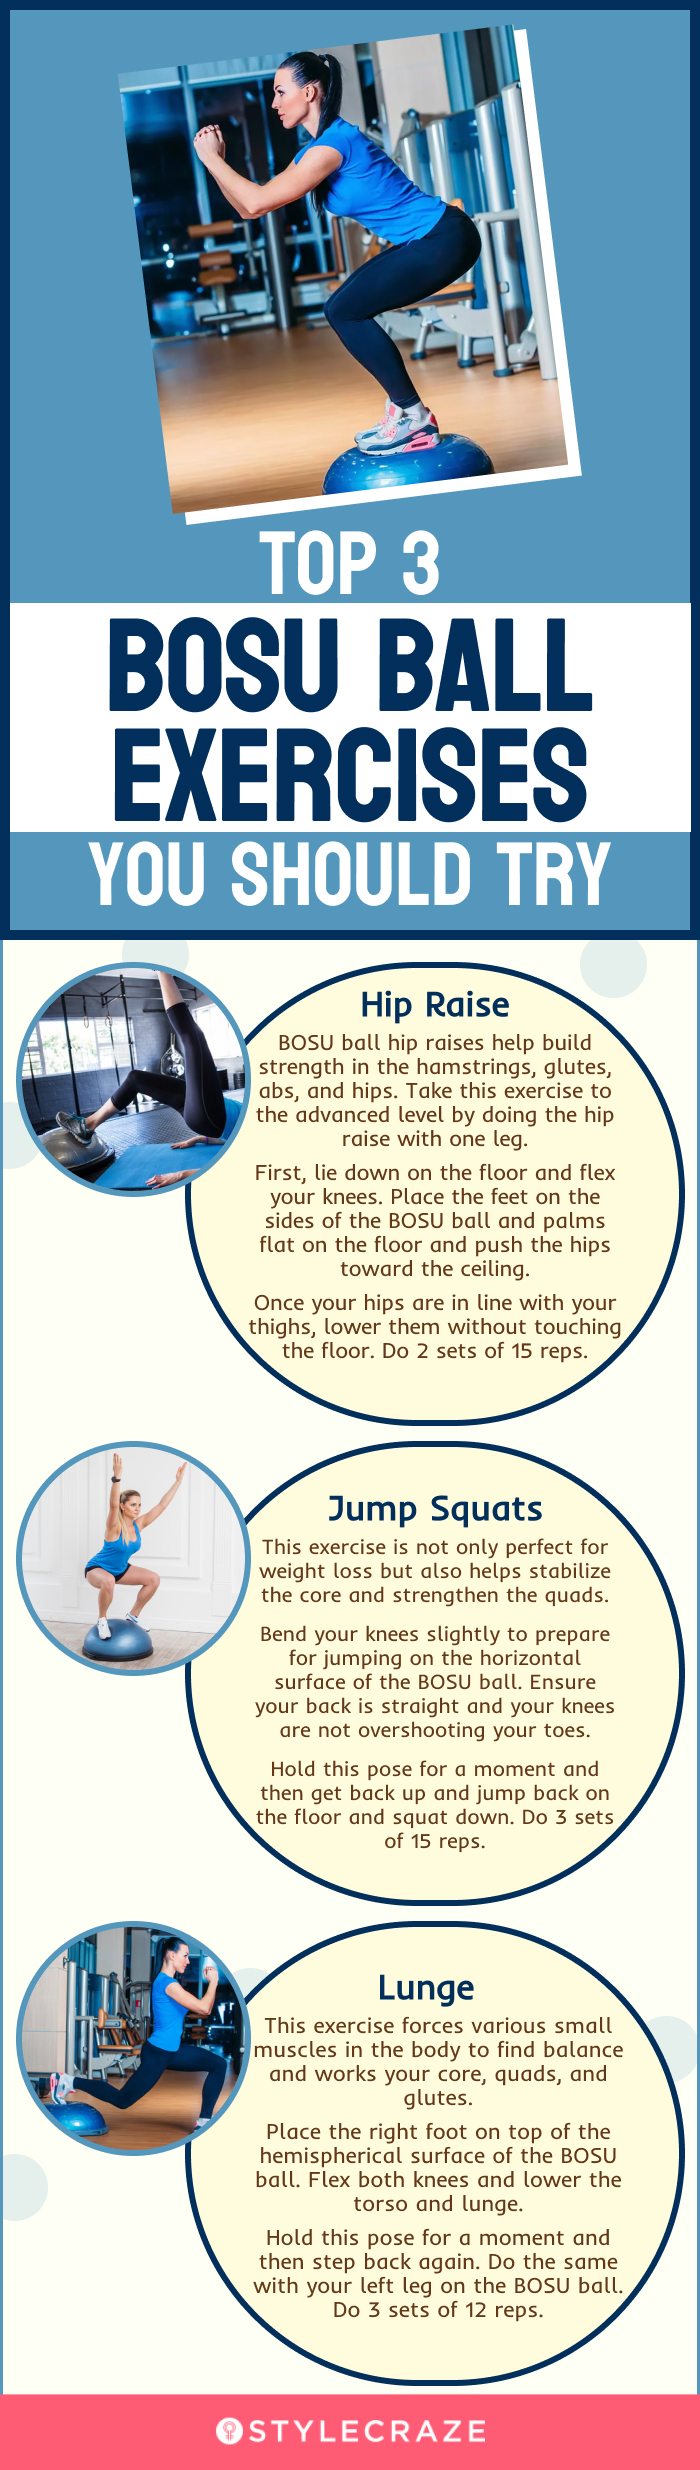 top 3 bosu ball exercises you should try (infographic)